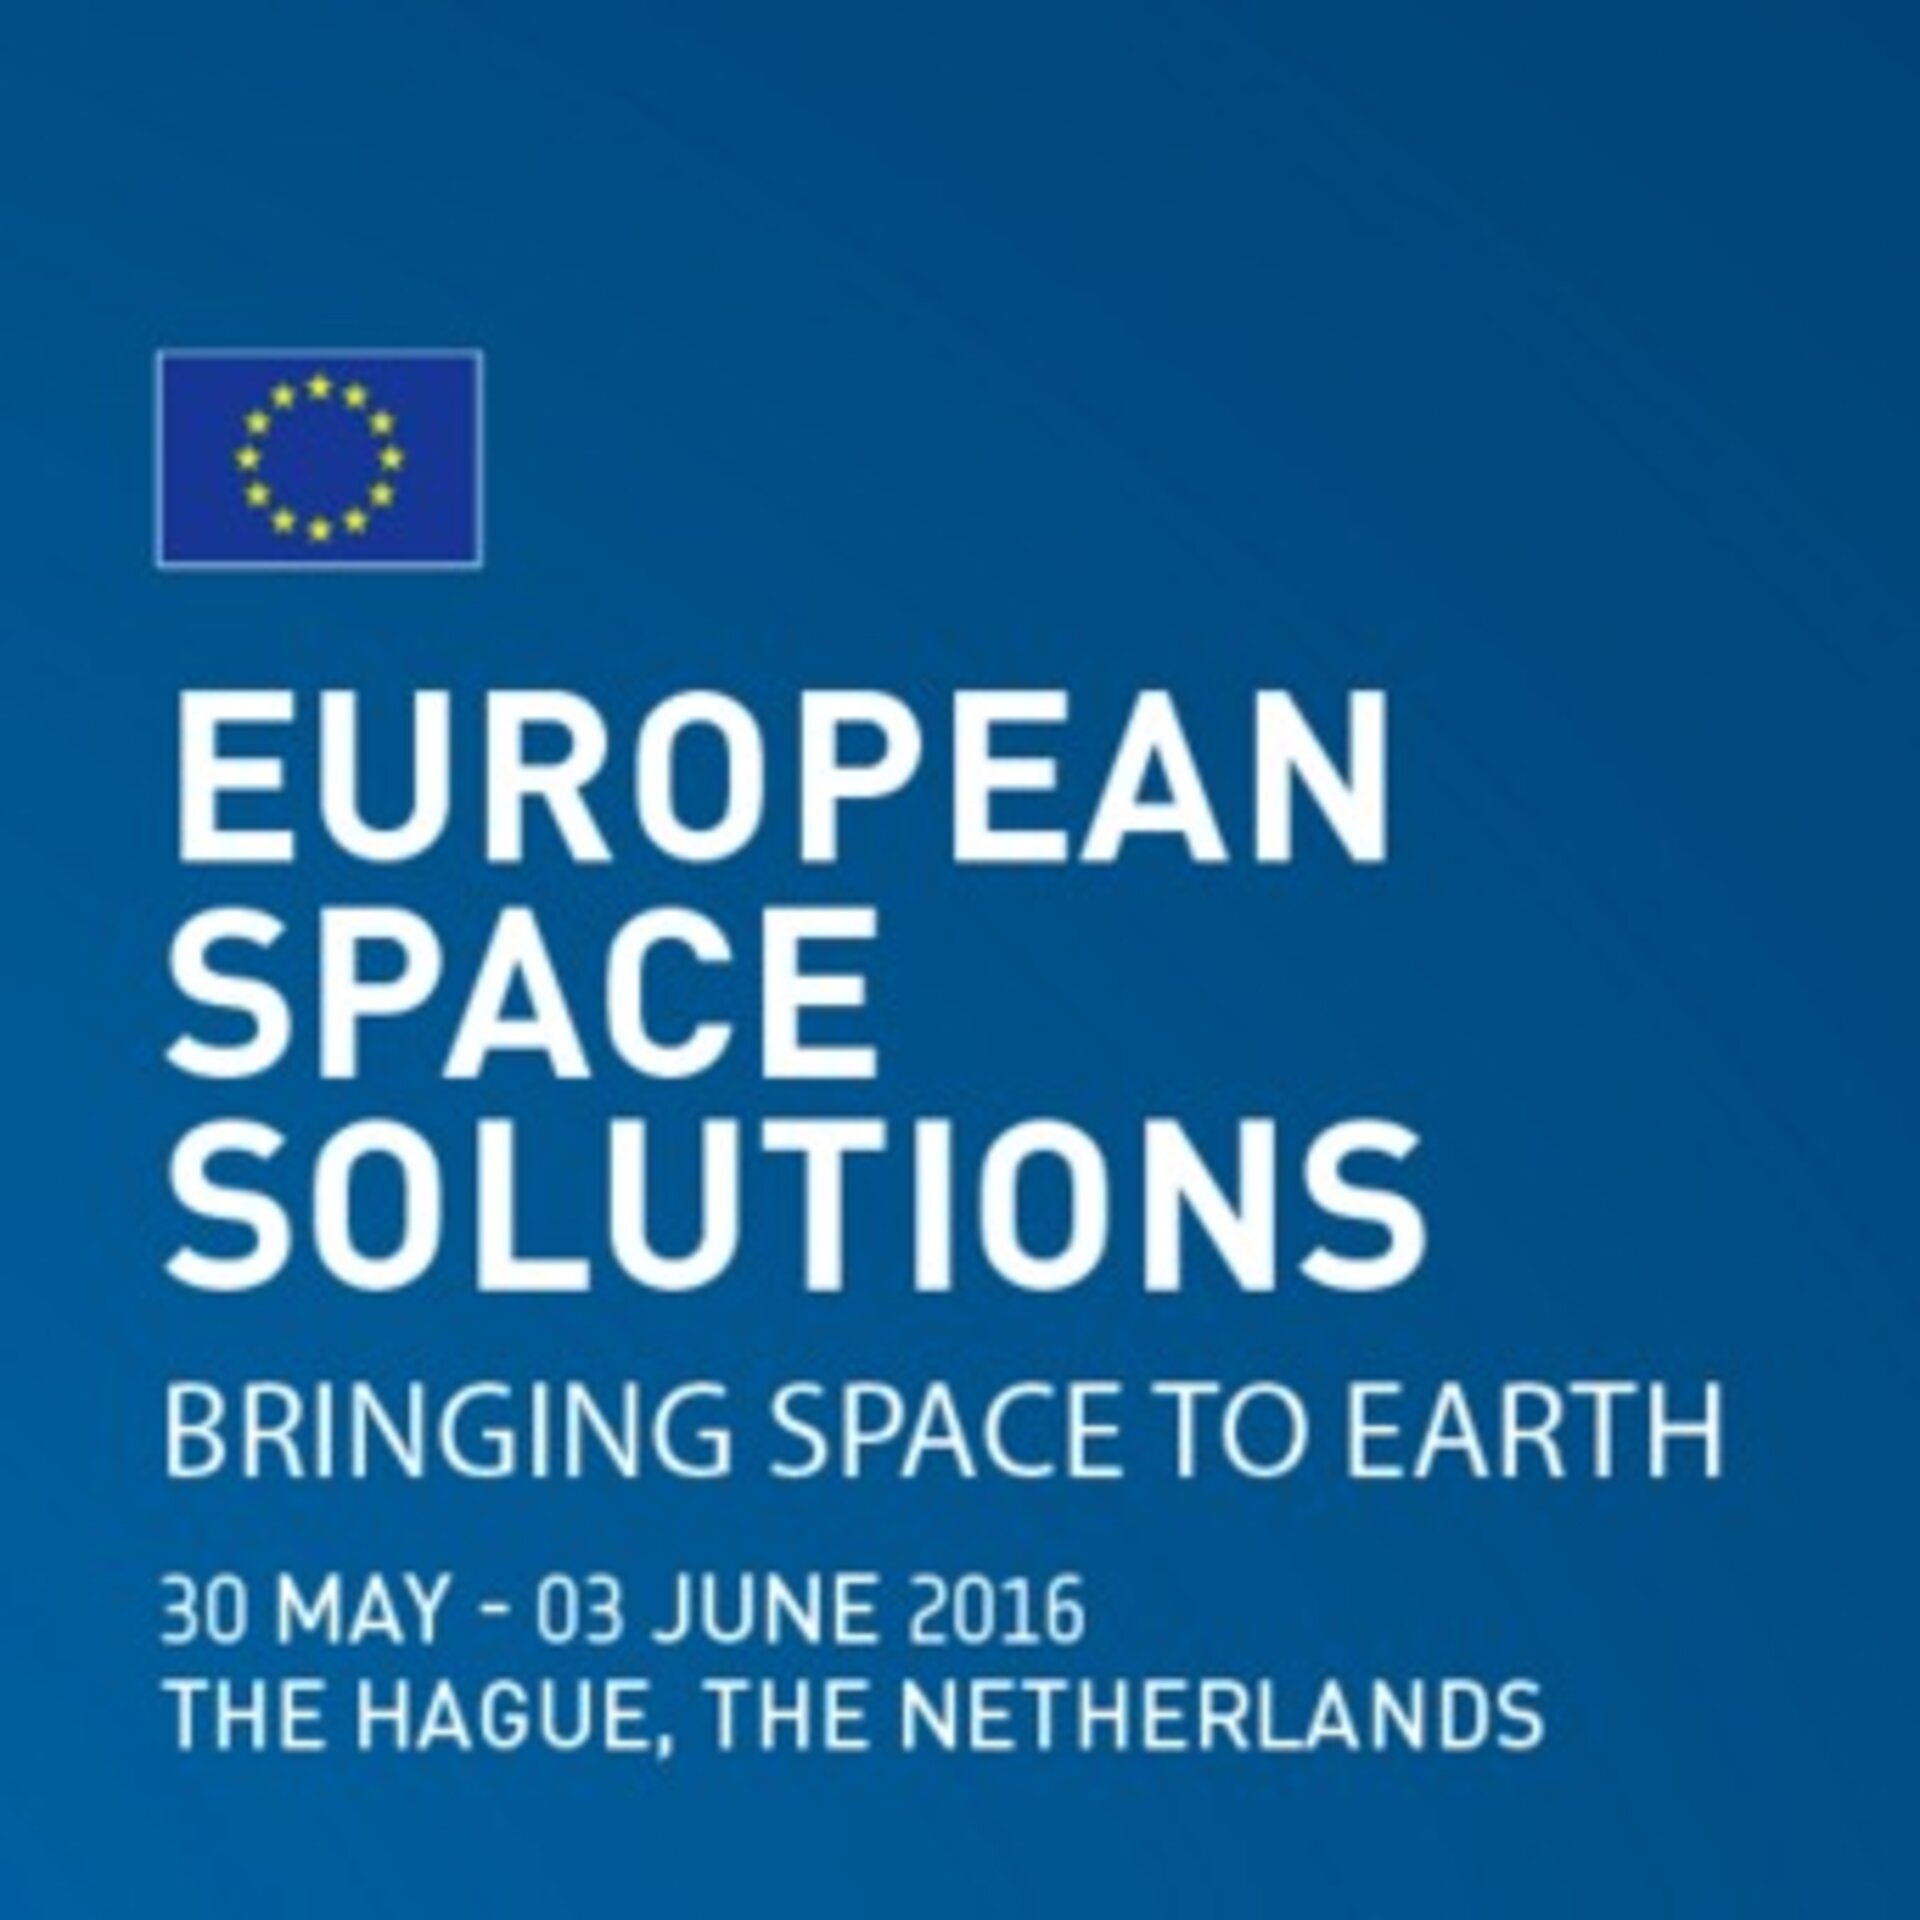 European Space Solutions 2016